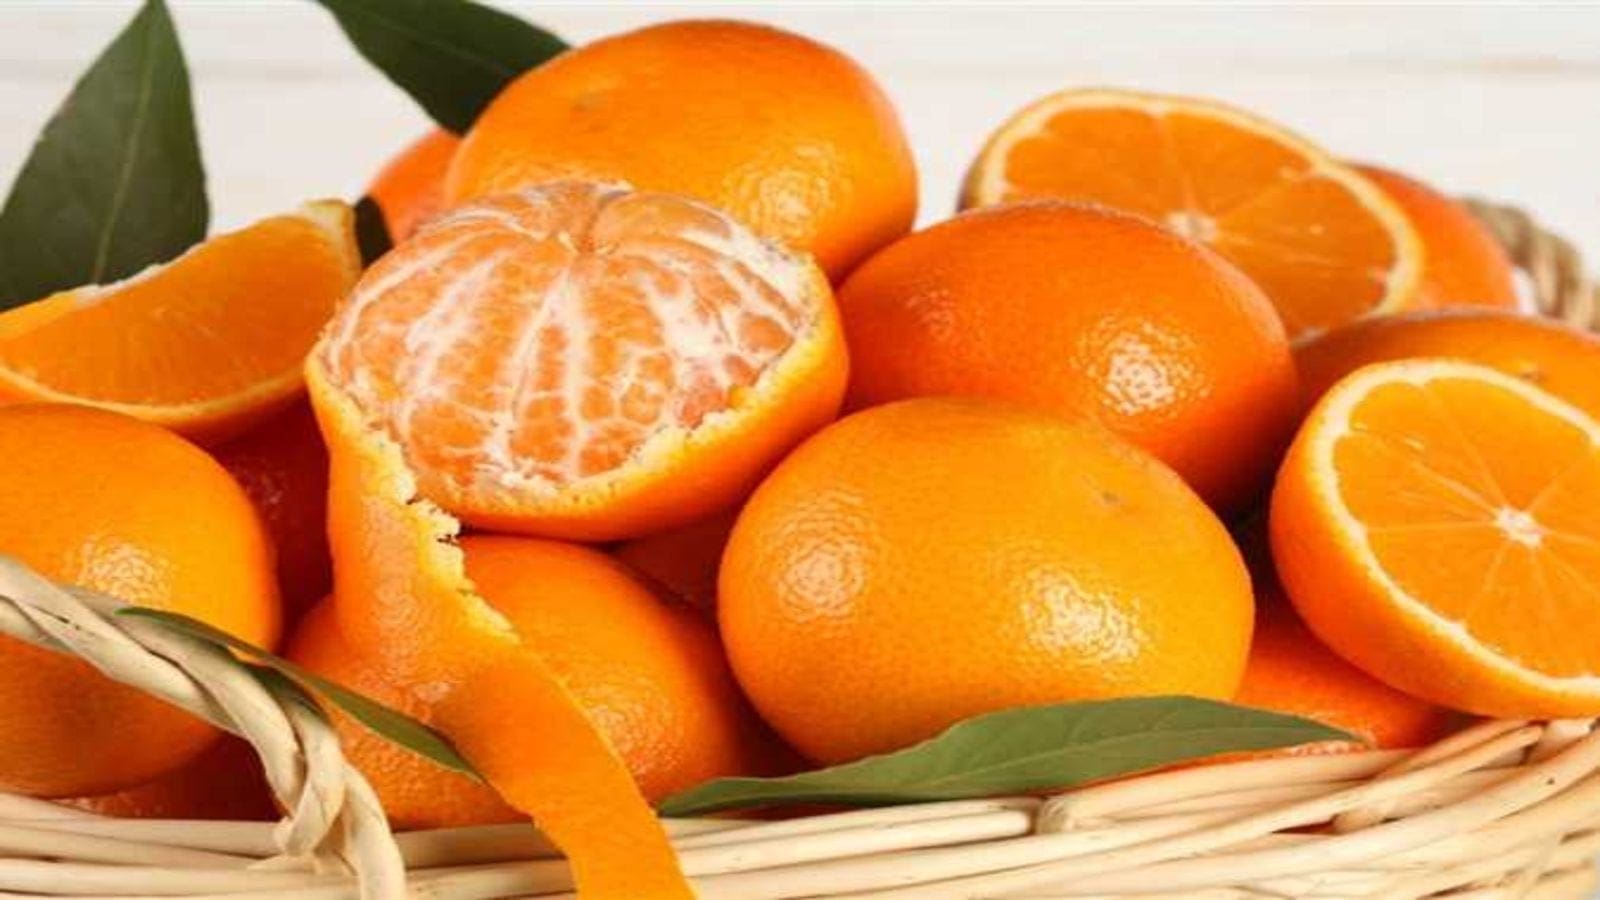 Egypt’s orange production to rise by 6.2% further propelling exports to reach 1.5 million metric tonnes